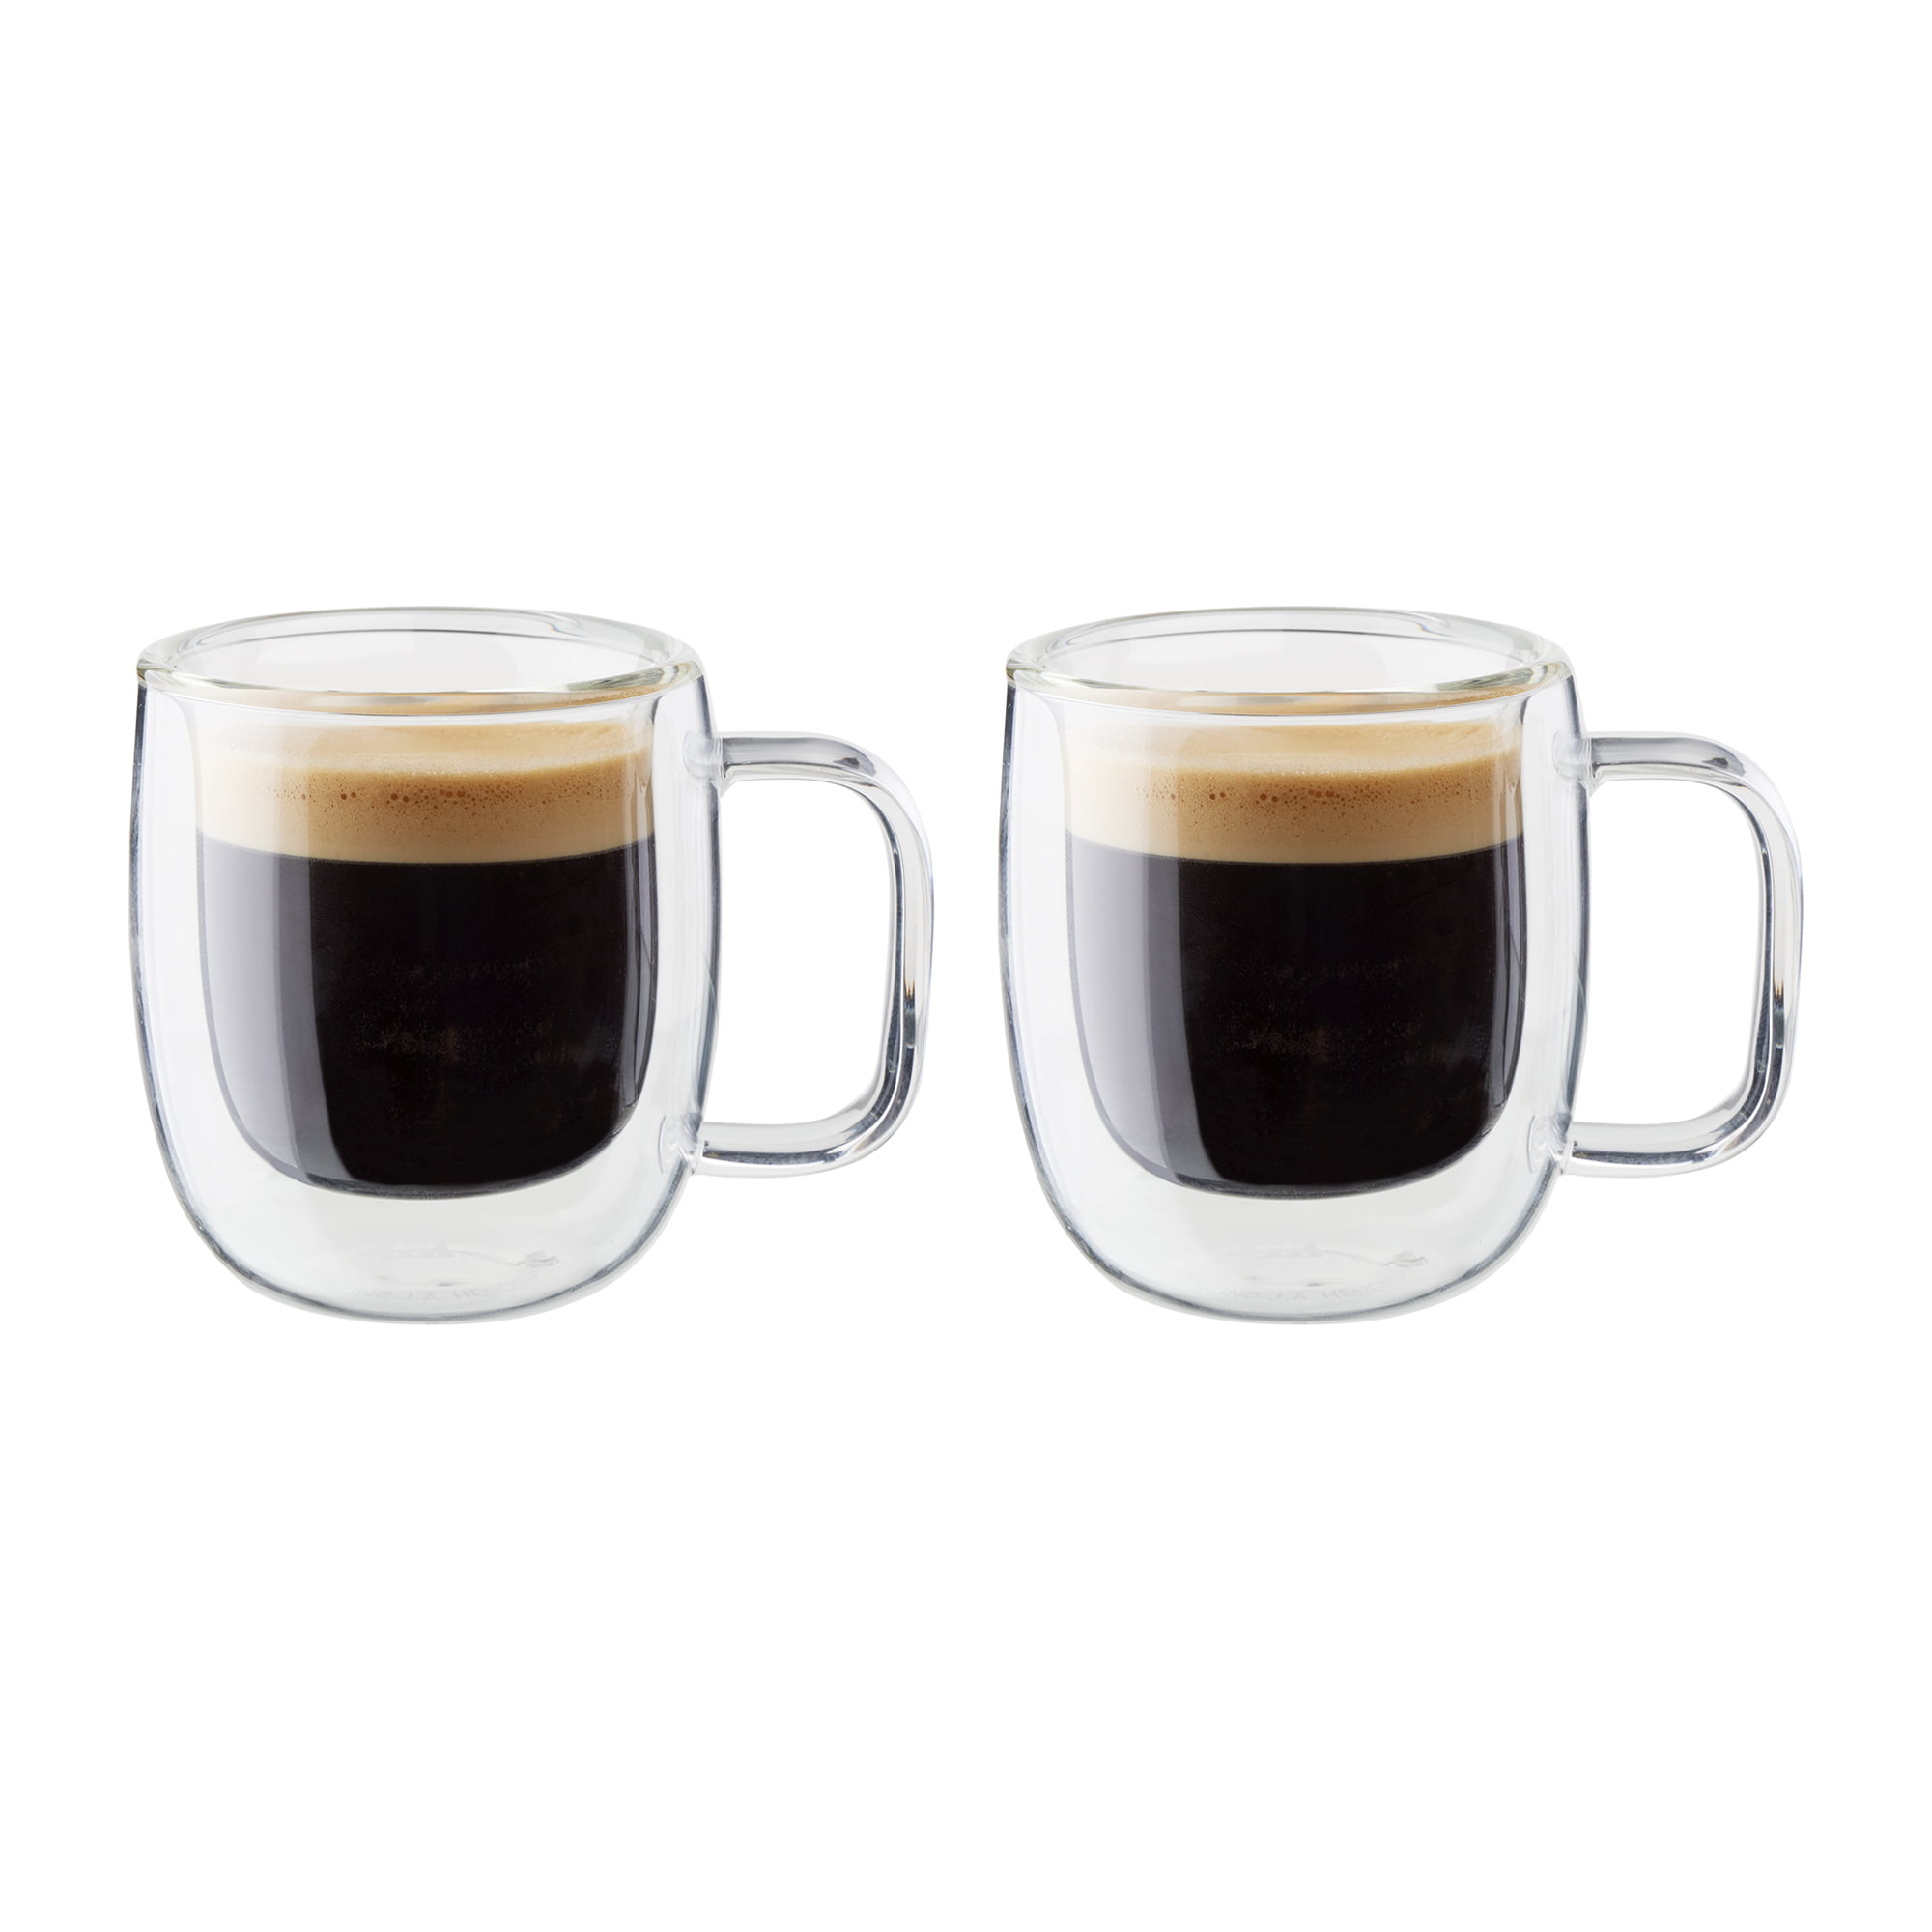 Sweese 5oz Double Wall Glass Espresso Cups Set of 2, Insulated Glass Coffee  Cups with Handle Perfect…See more Sweese 5oz Double Wall Glass Espresso